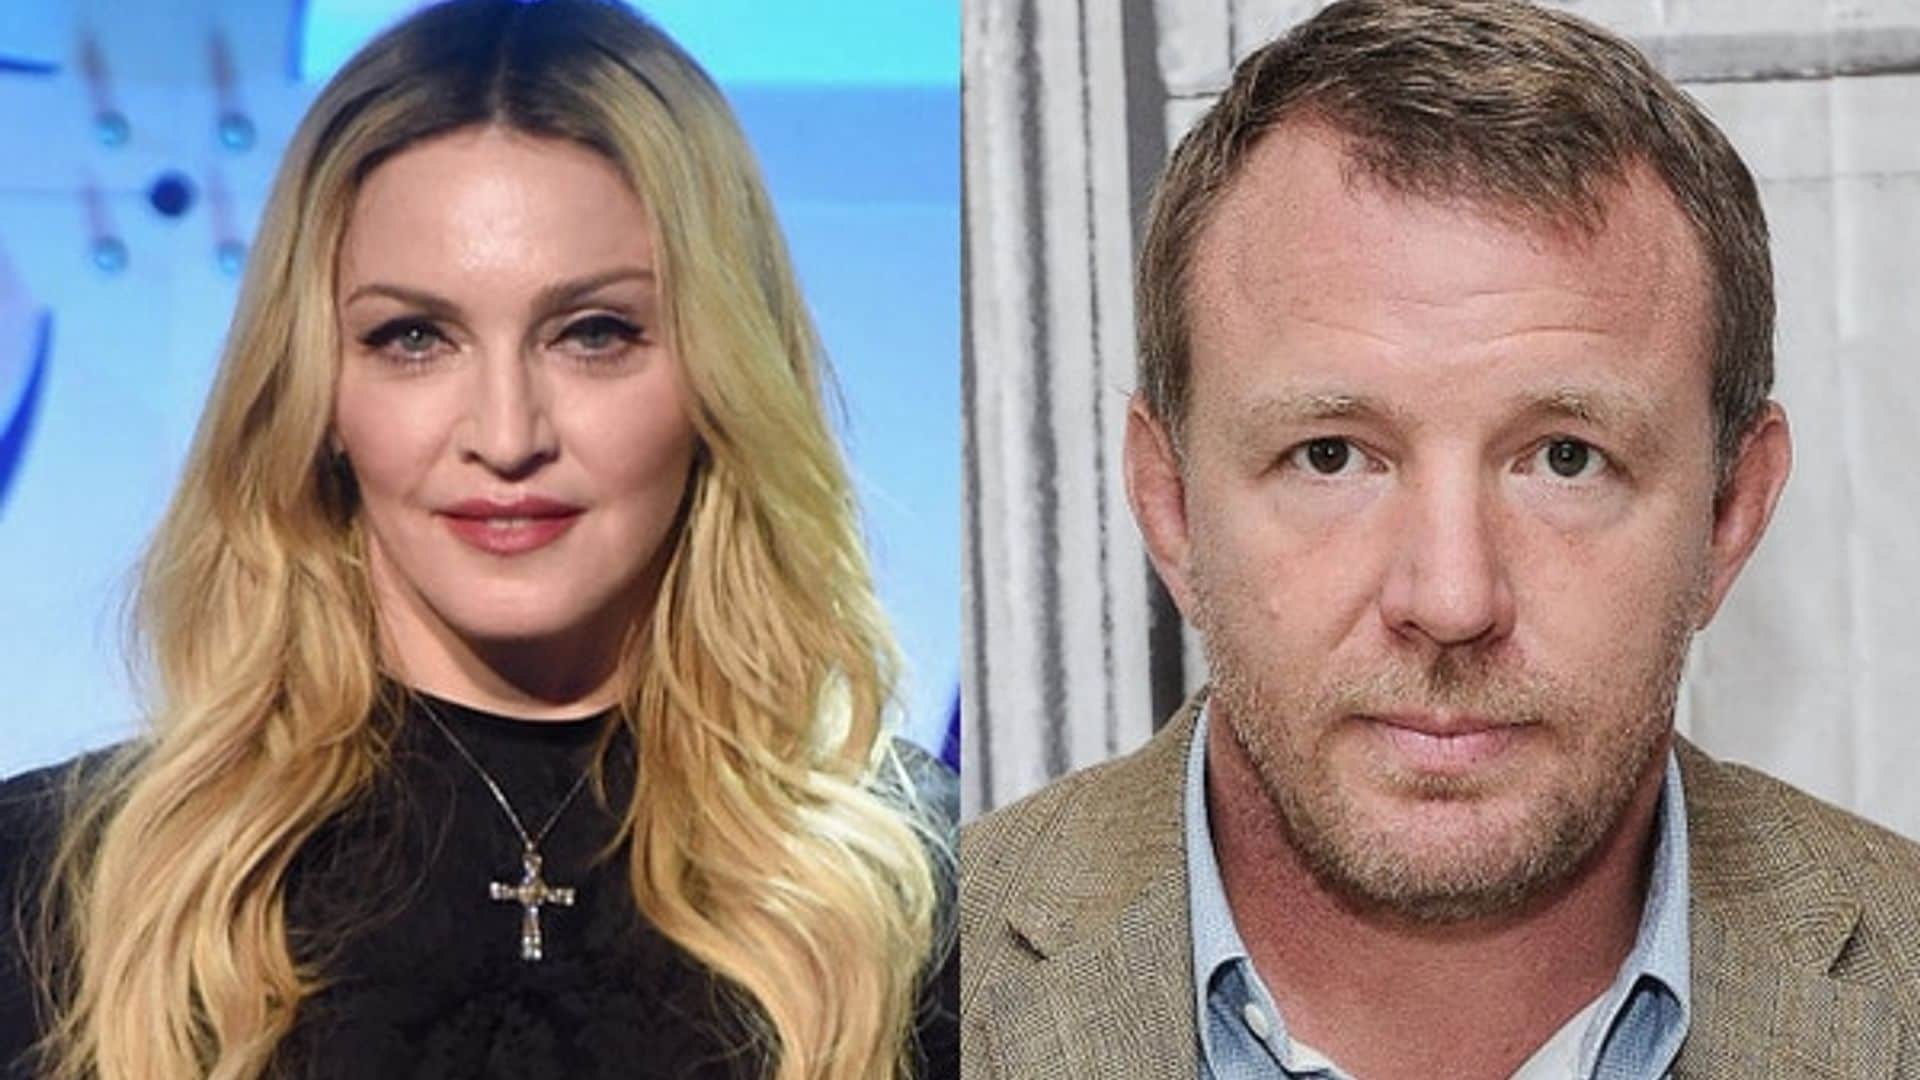 Madonna and Guy Ritchie's public custody battle is 'stressful' on son Rocco